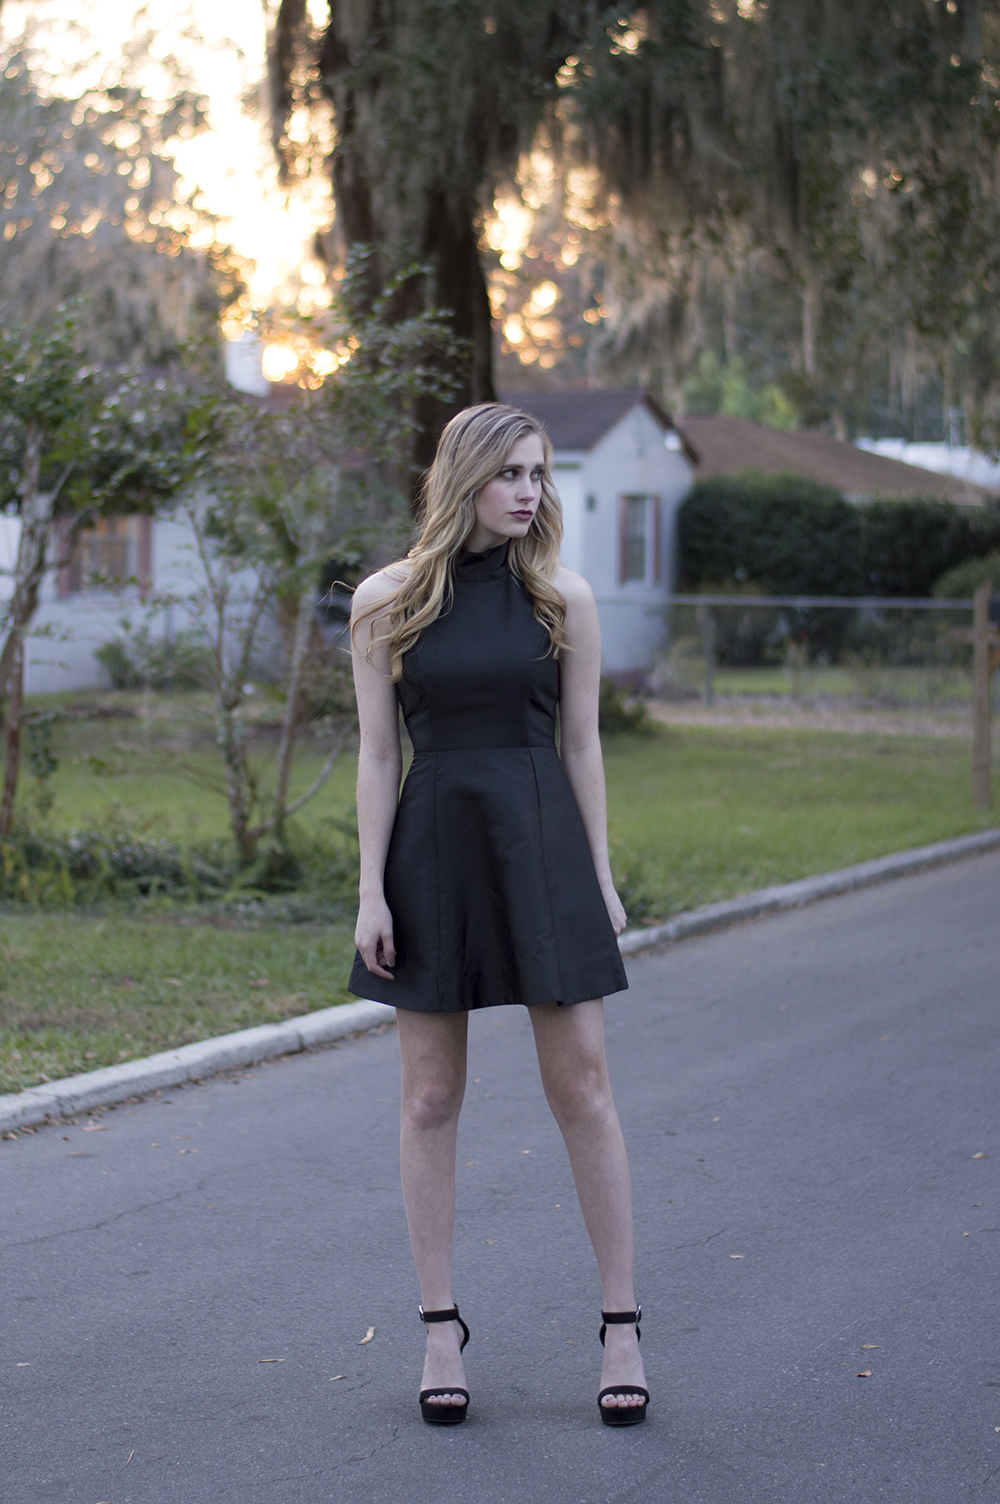 styelled-blog-fashion-blogger-style-fall-trends-winter-little-black-dress-forever-21-blonde-sweater-weather-03